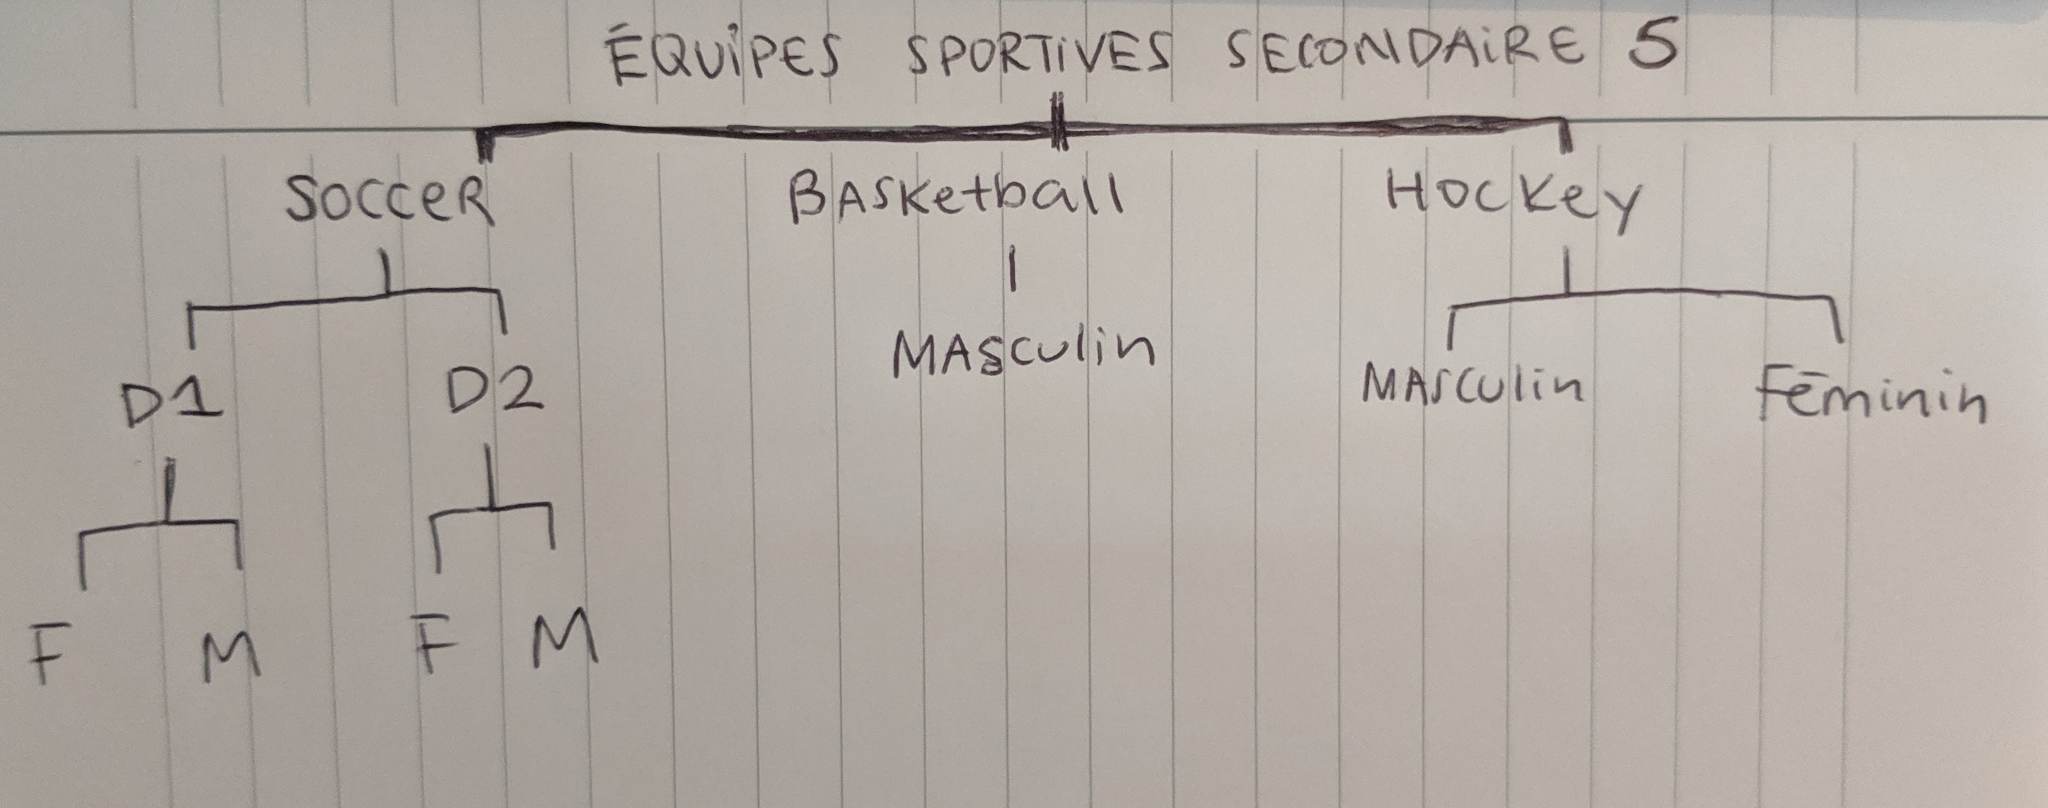 exemple equipe sportive